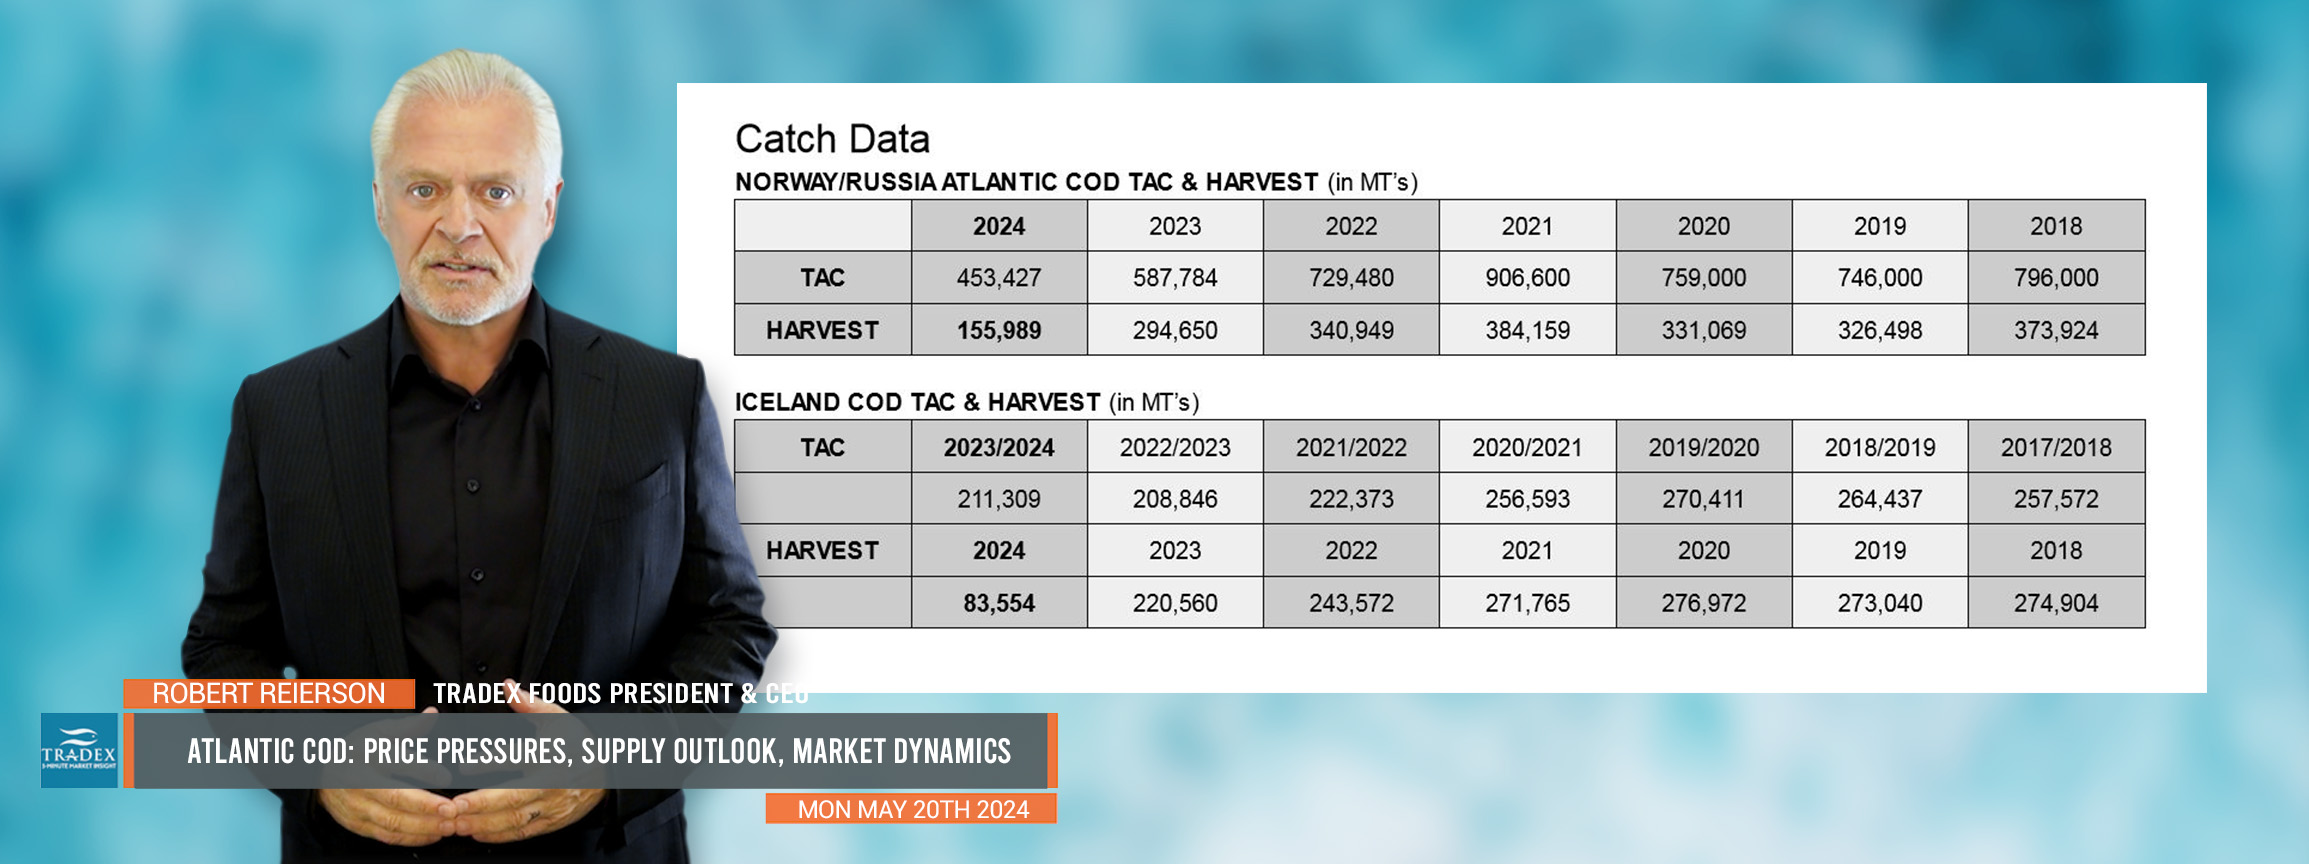 Atlantic Cod Update: Price Dynamics, Global Supply, Norway - Russia - Iceland